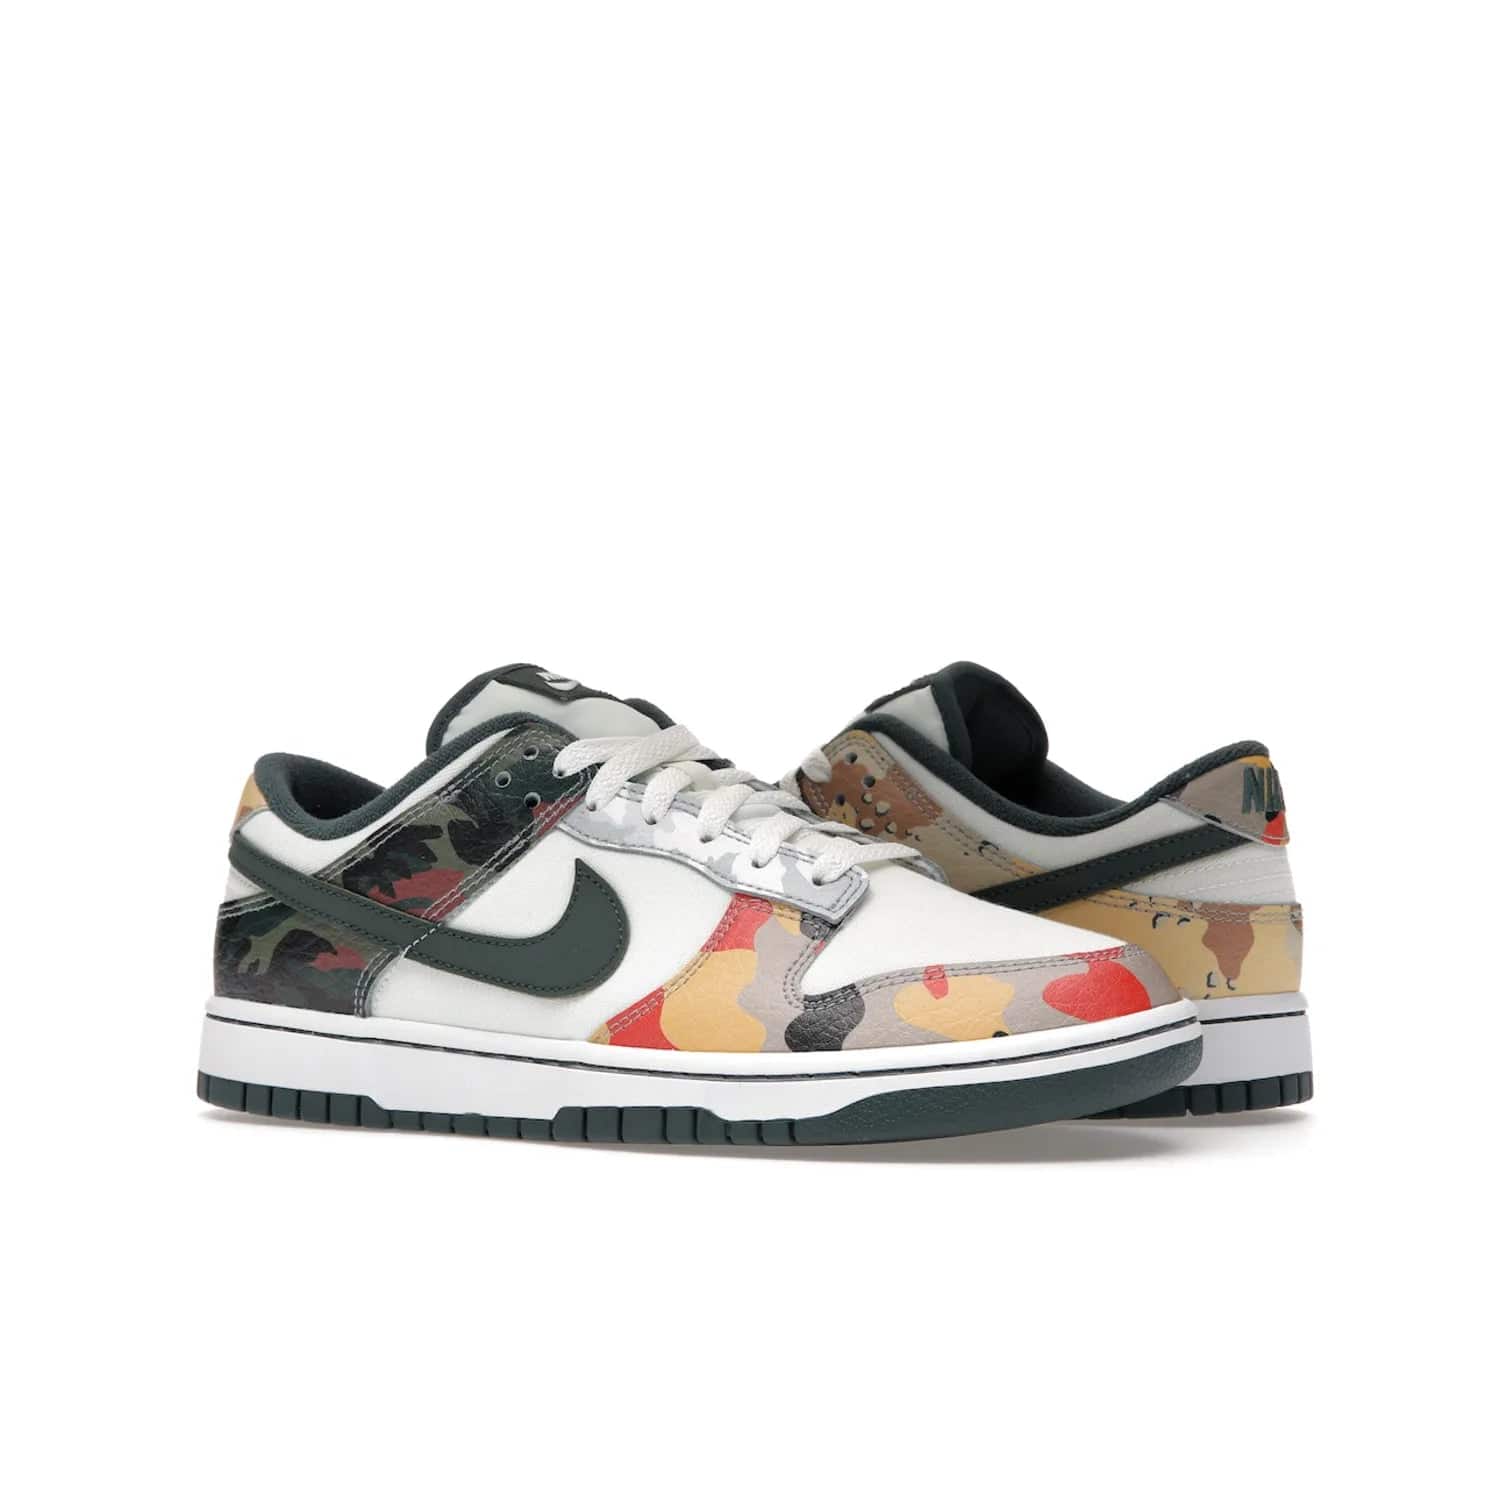 Nike Dunk Low SE Sail Multi-Camo - Image 4 - Only at www.BallersClubKickz.com - Classic design meets statement style in the Nike Dunk Low SE Sail Multi-Camo. White leather base with multi-color camo overlays, vibrant Nike Swooshes, and orange Nike embroidery. Get yours August 2021.